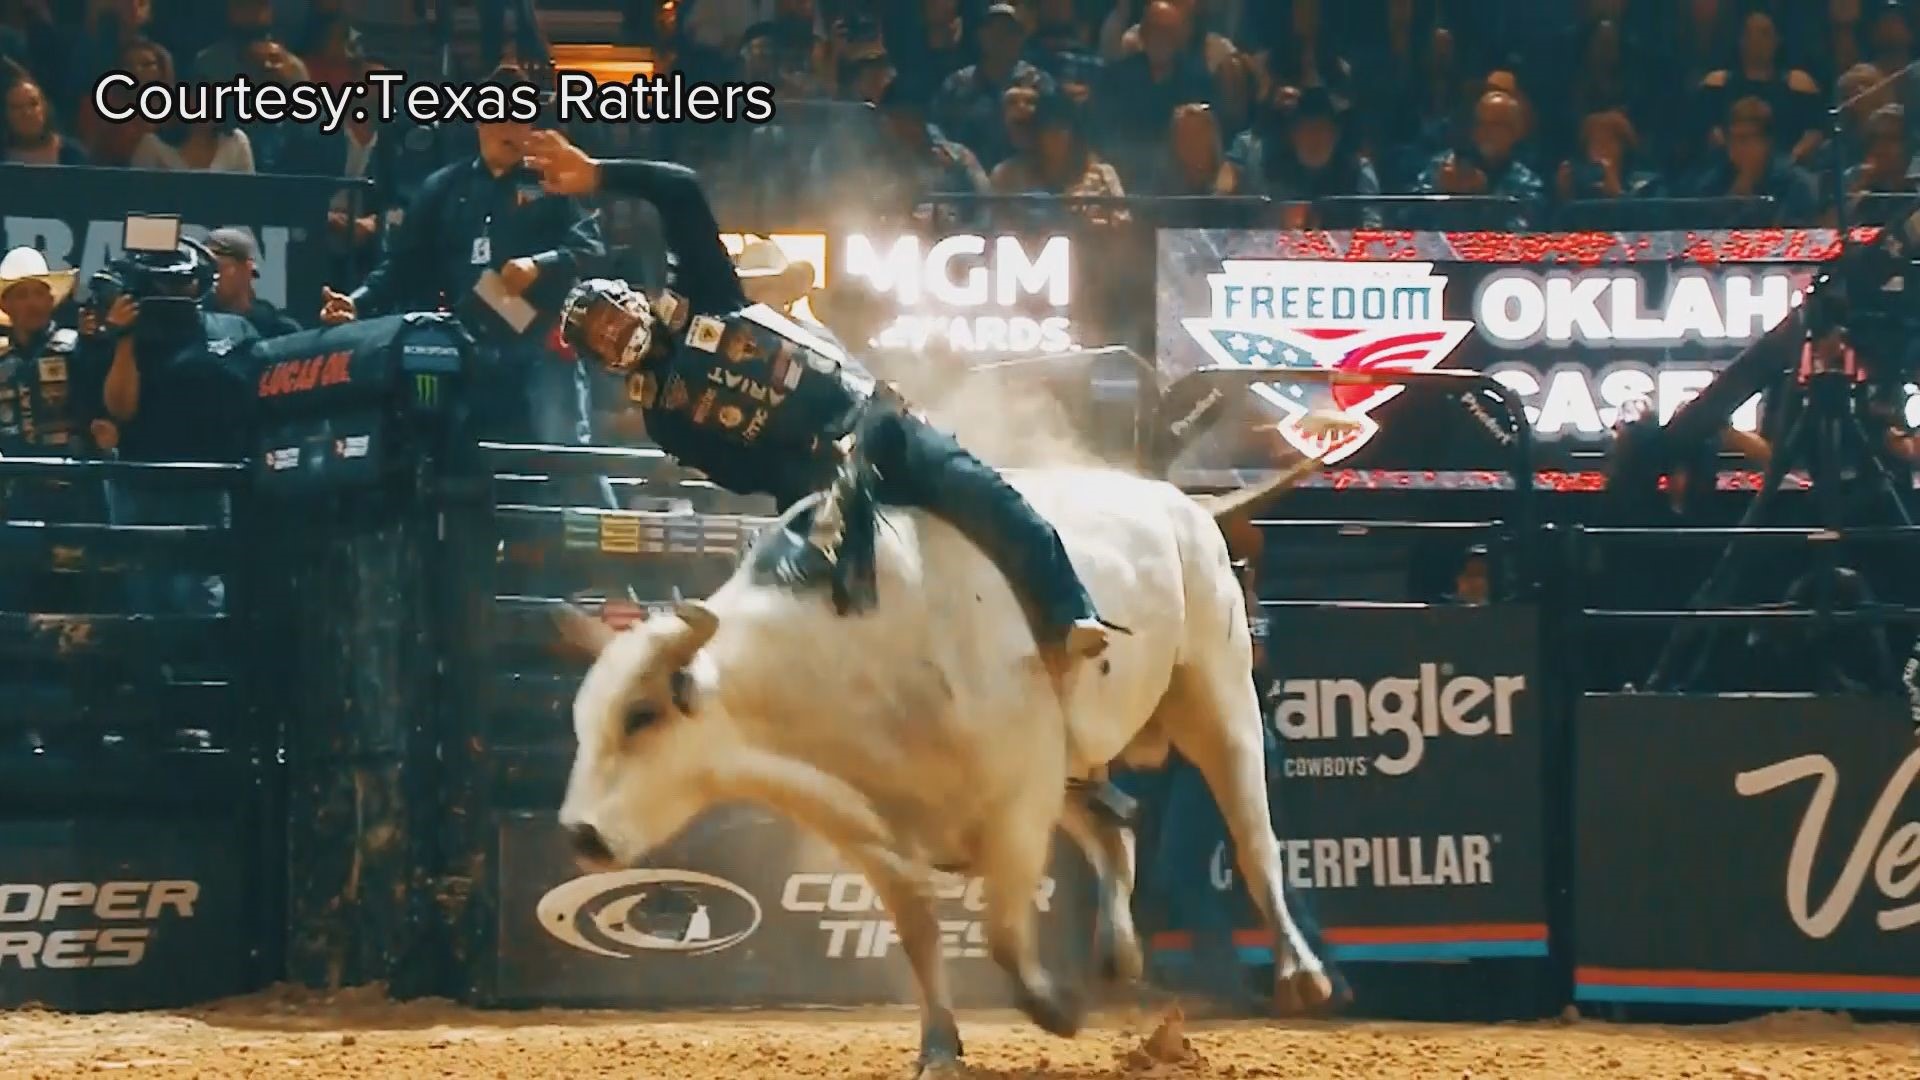 The event is set to take place June 20. Team Series Champions Texas Rattlers will be riding alongside the Odessa College Rodeo team, who have a history themselves.